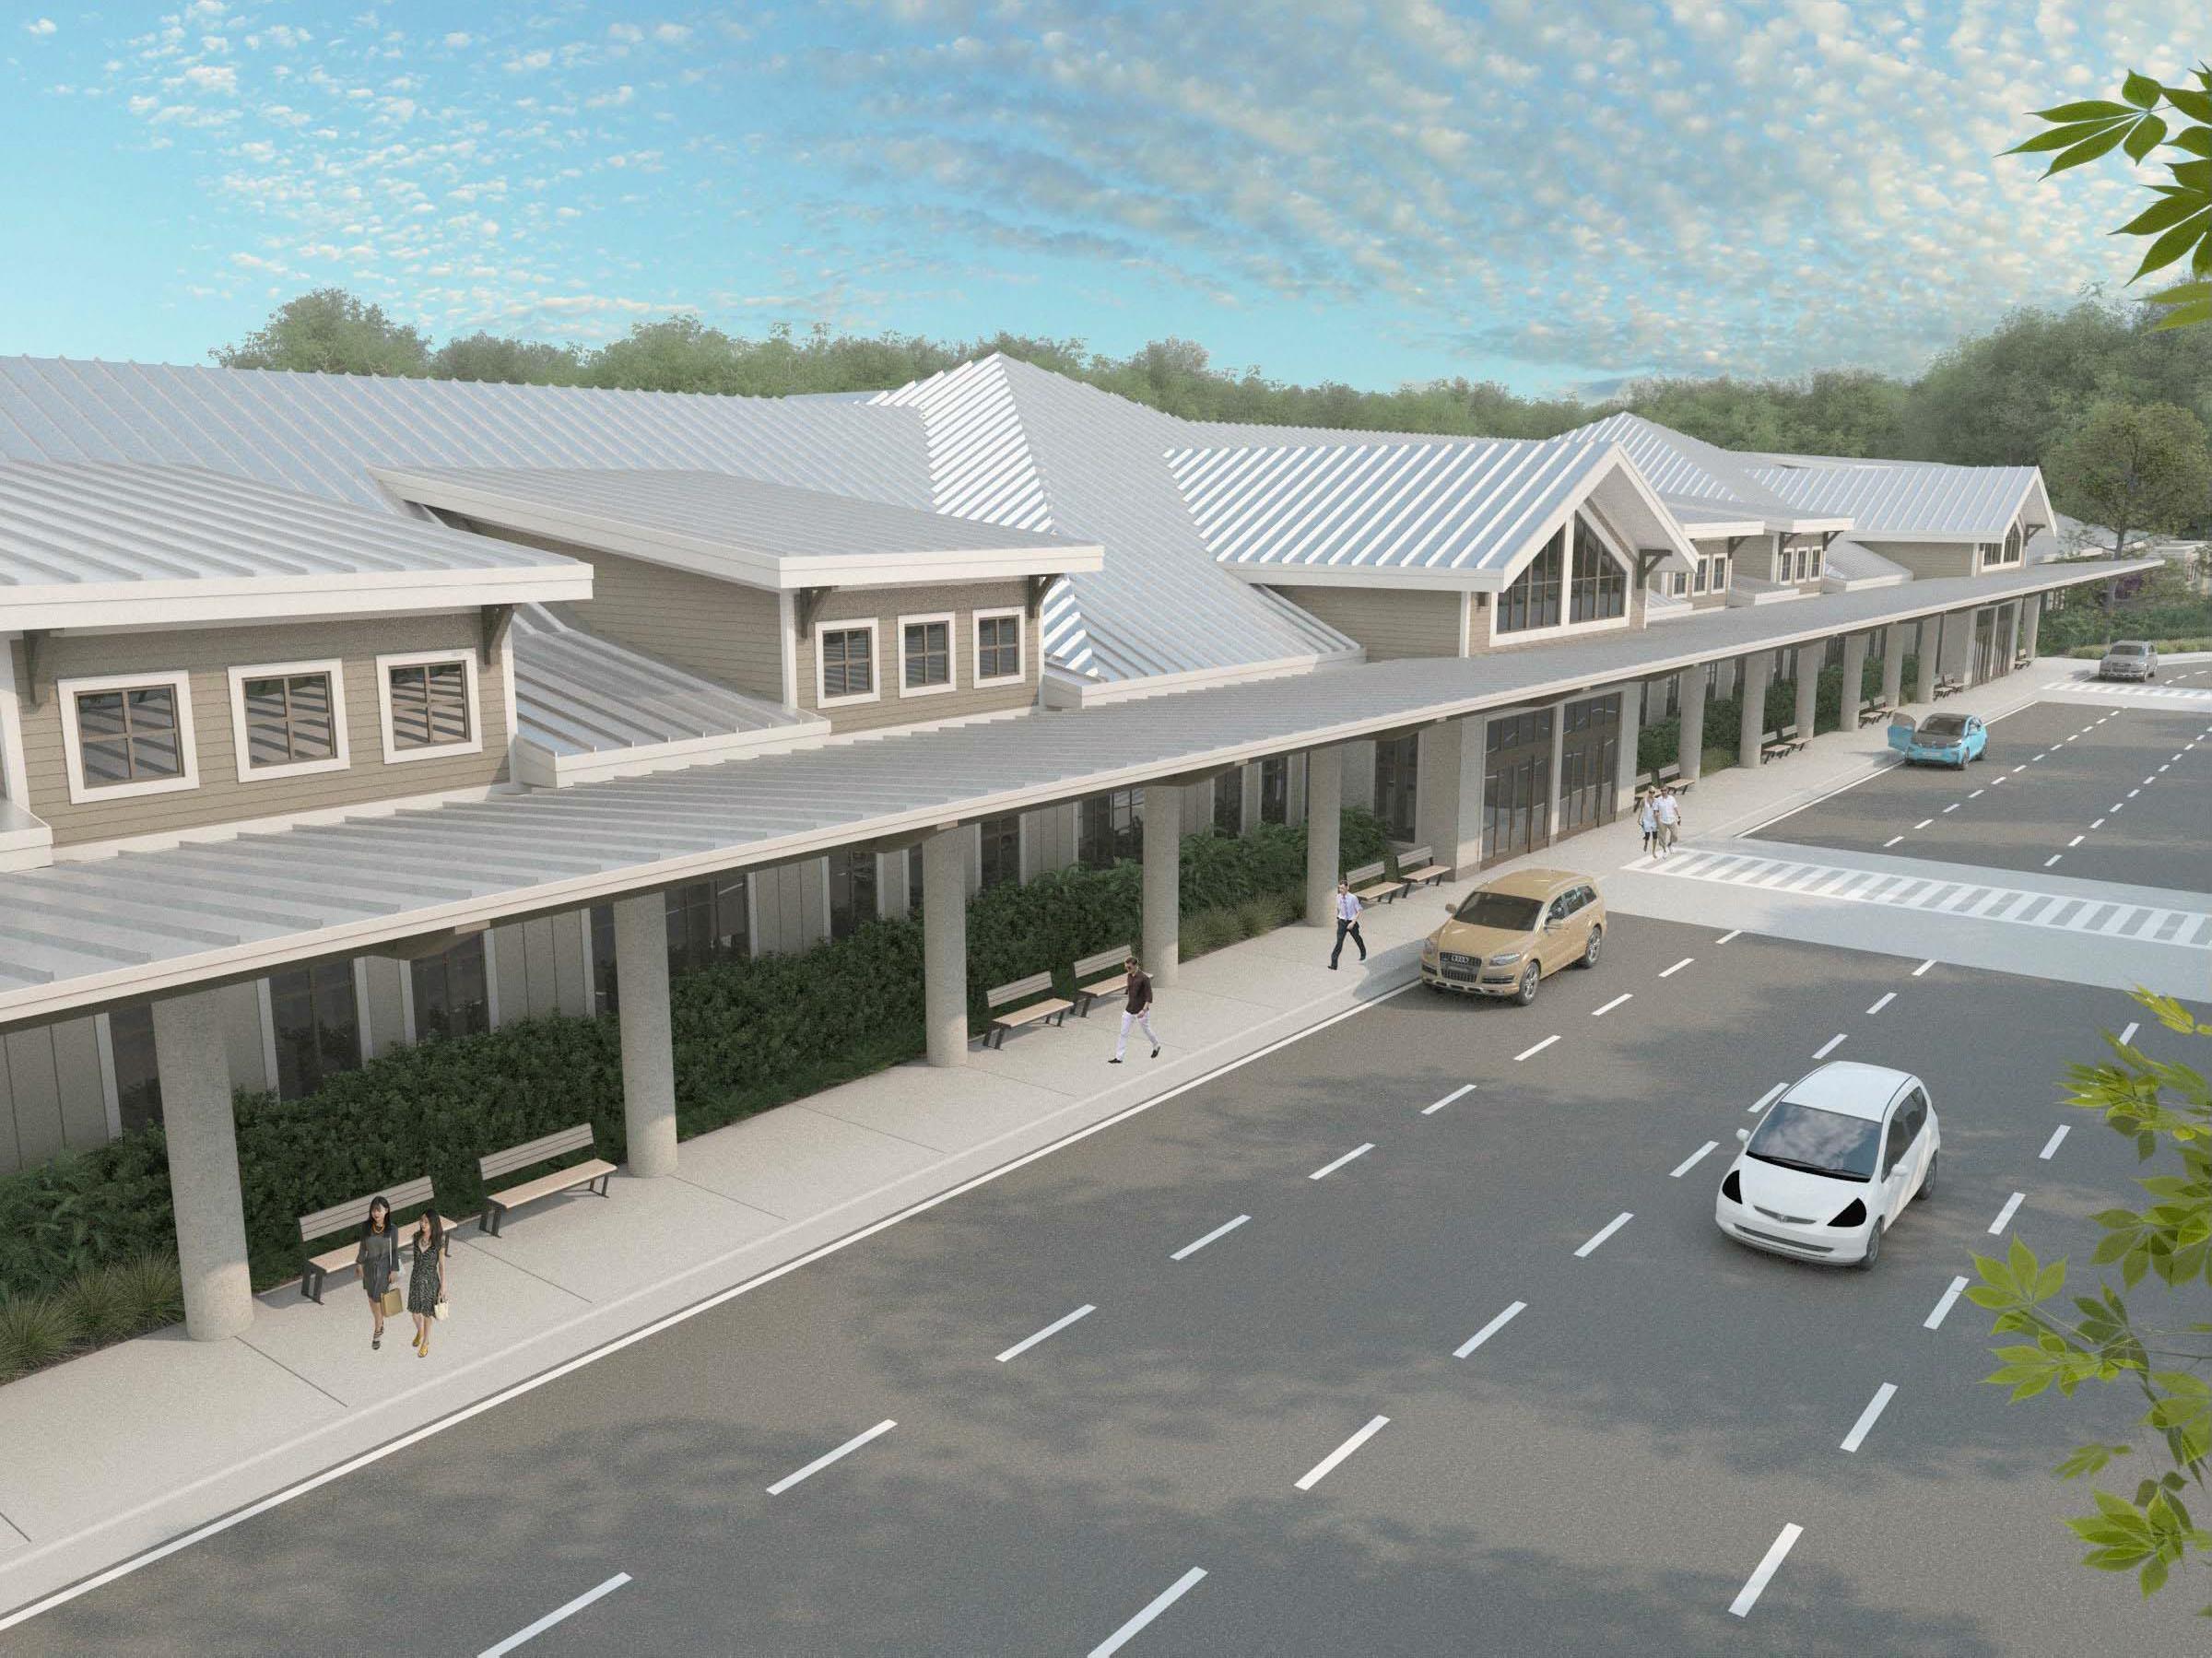 Hilton Head Island Airport Terminal Upgrade Approved by County Council